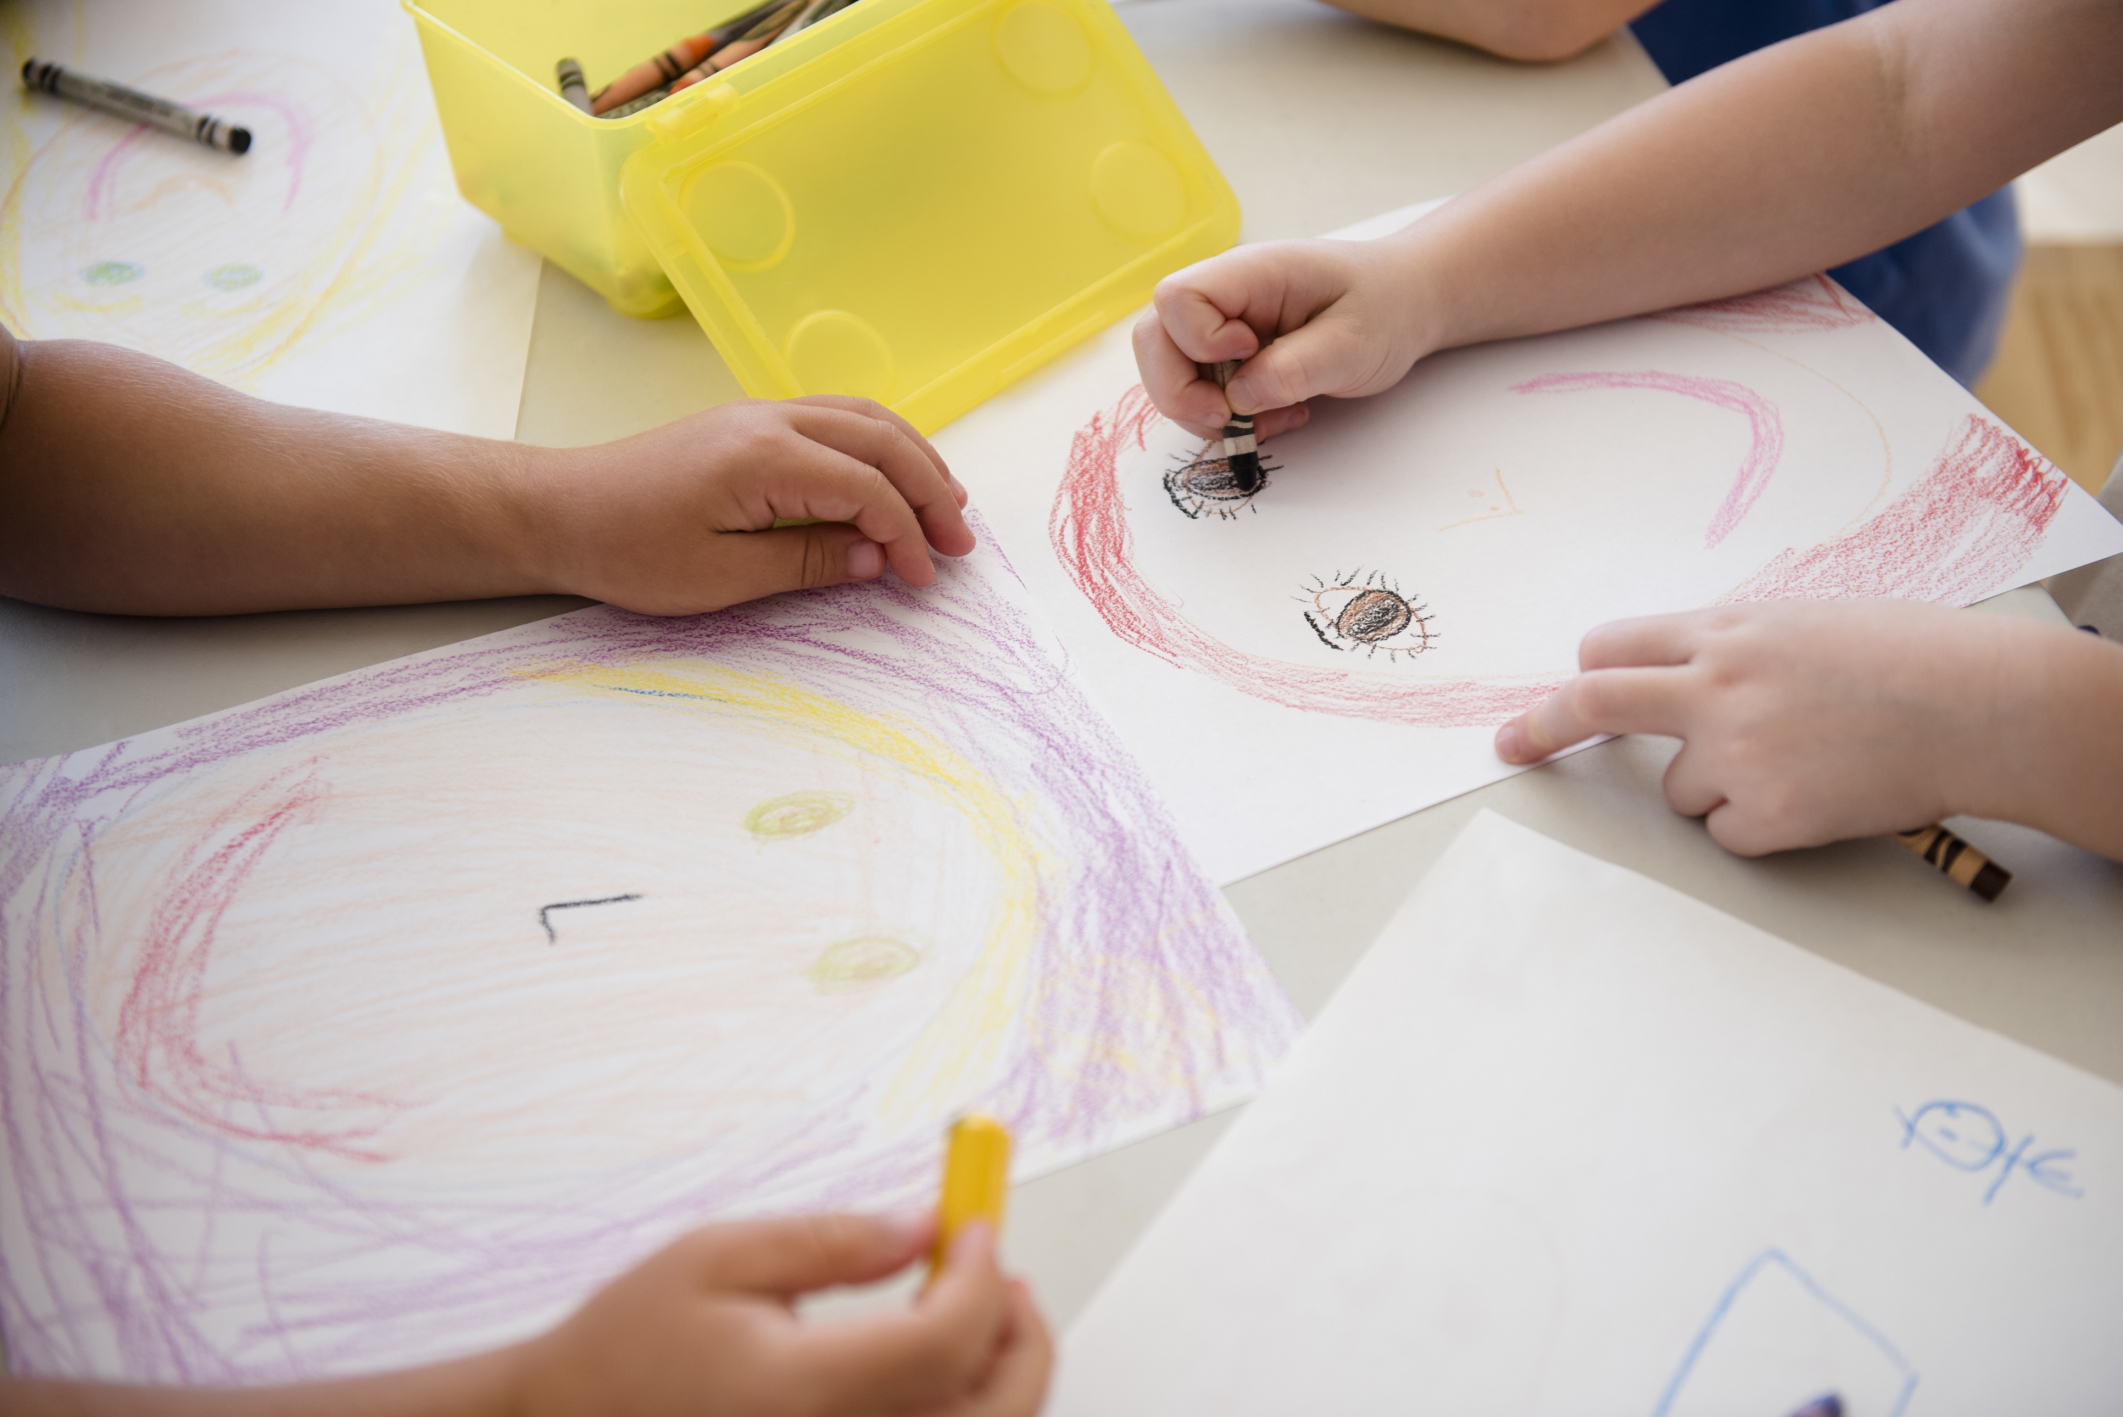 Young children drawing with crayons on paper in a classroom.